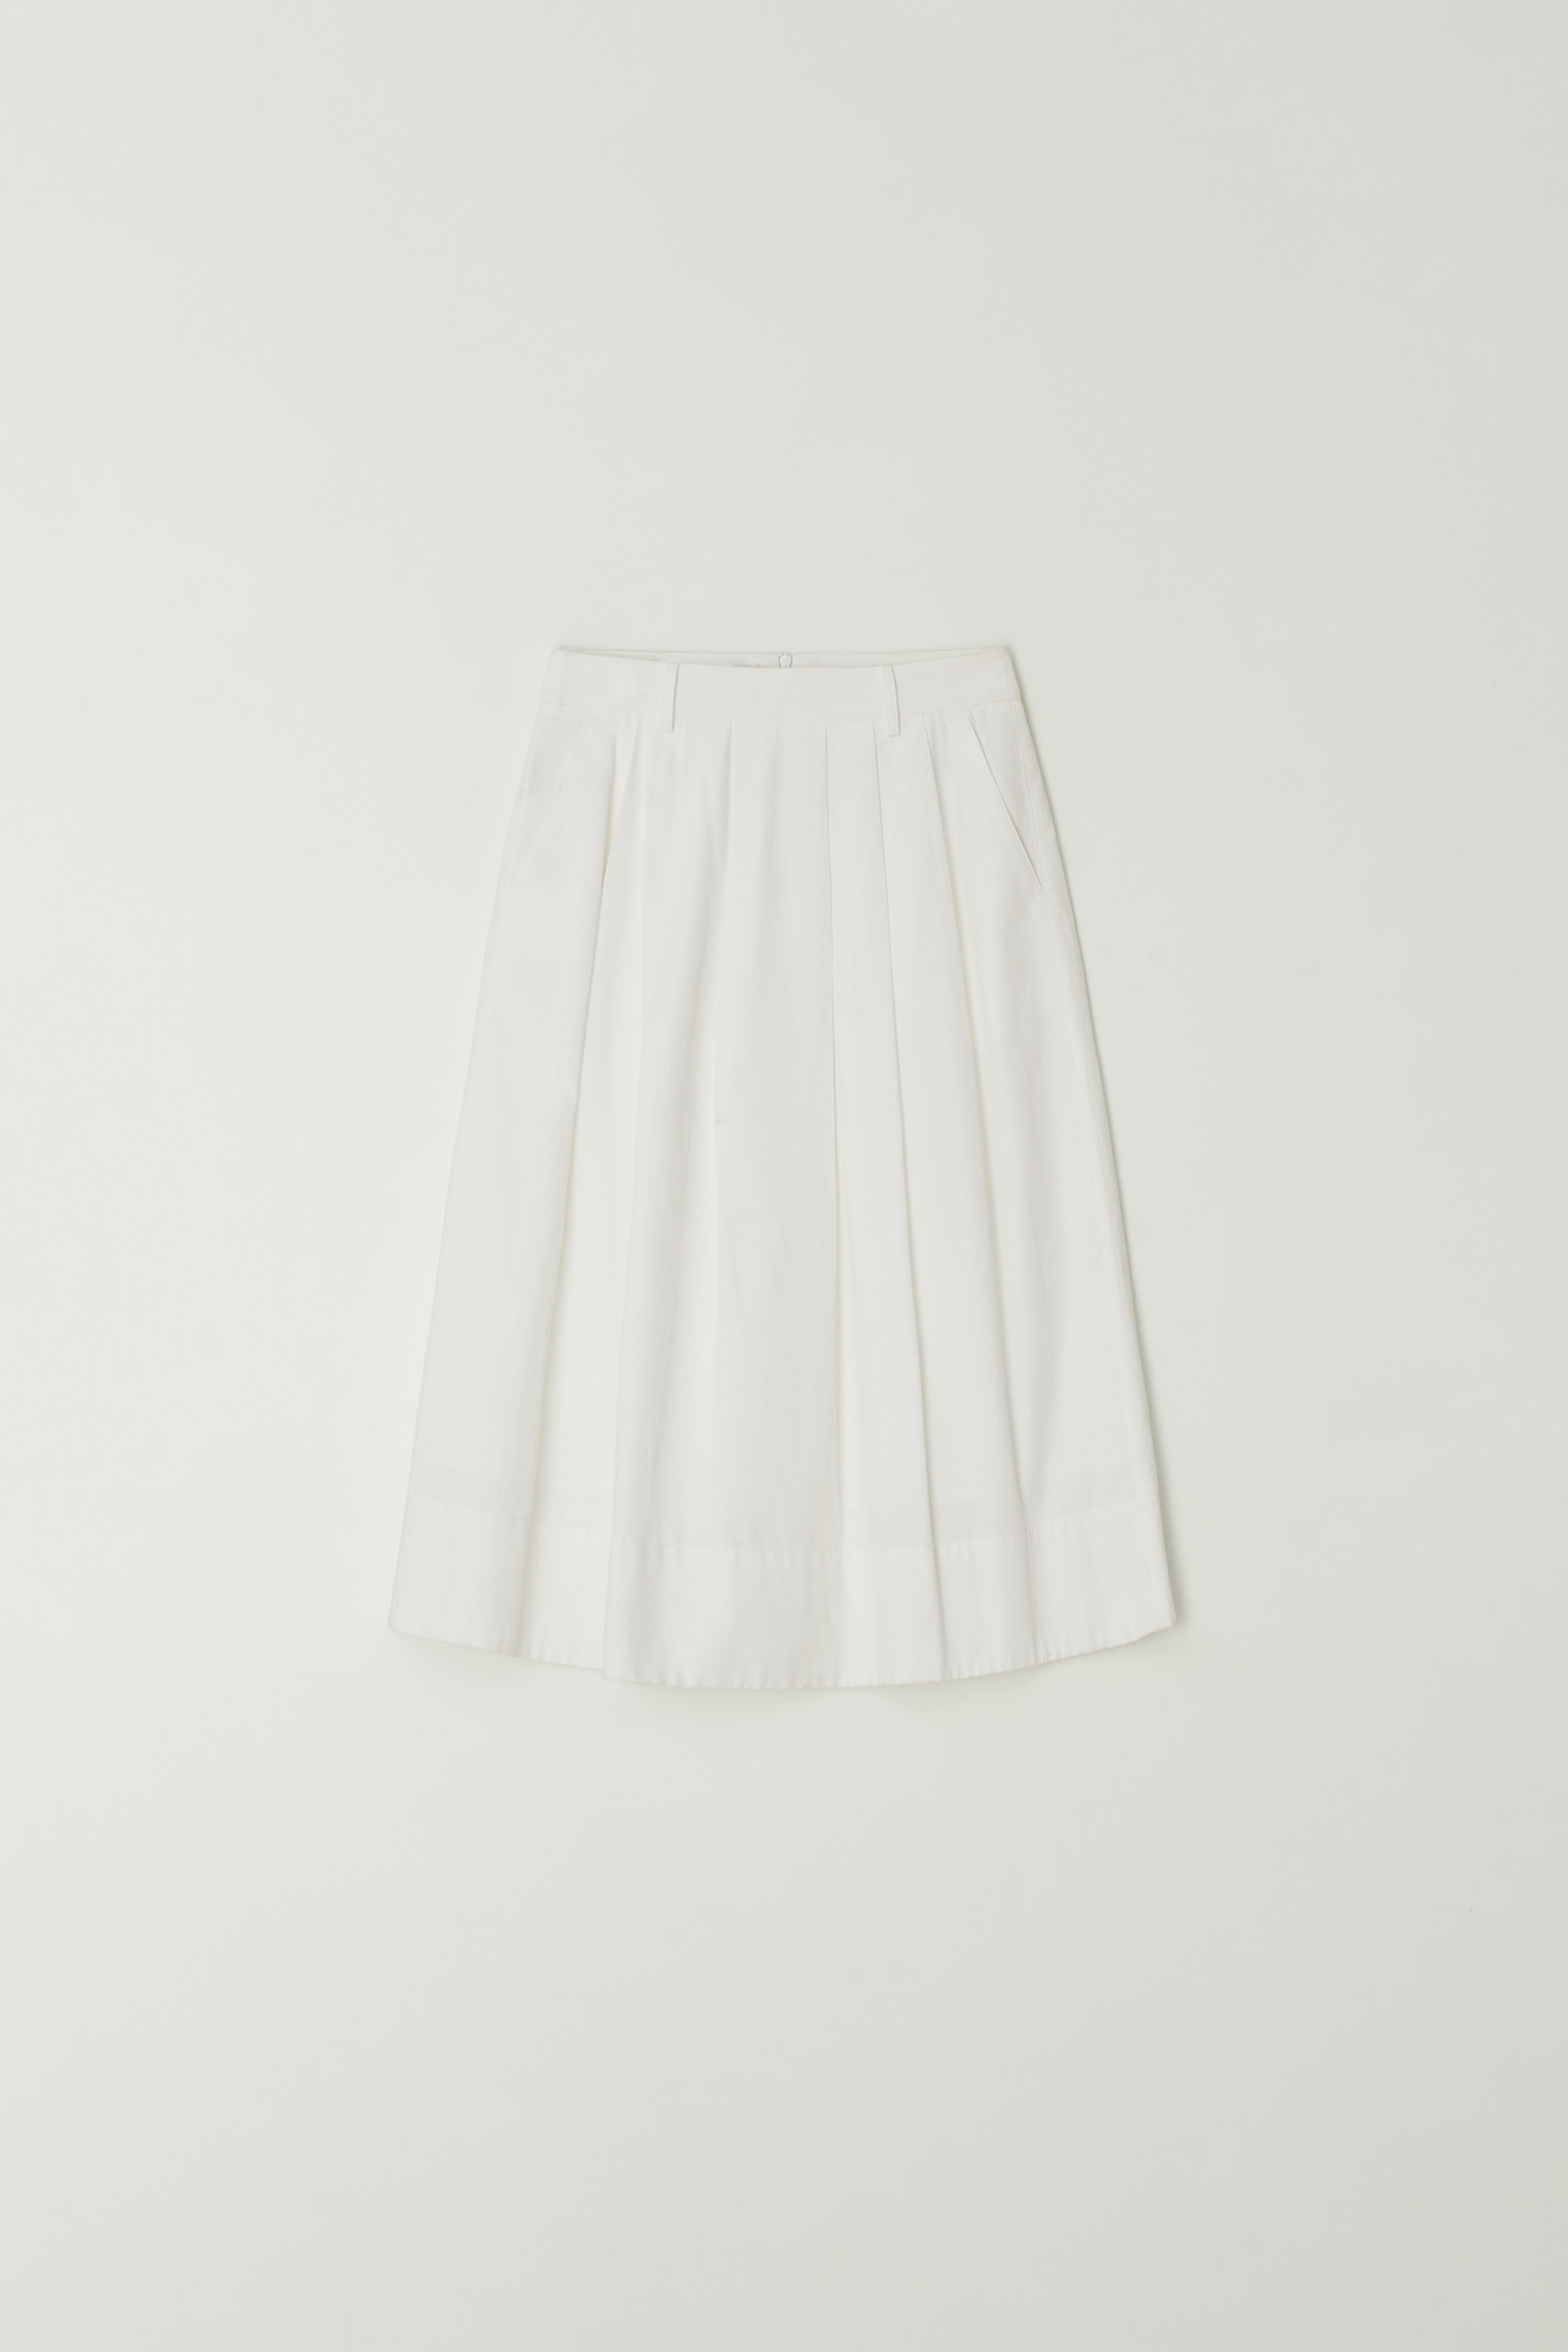 [12th] Clare Skirt